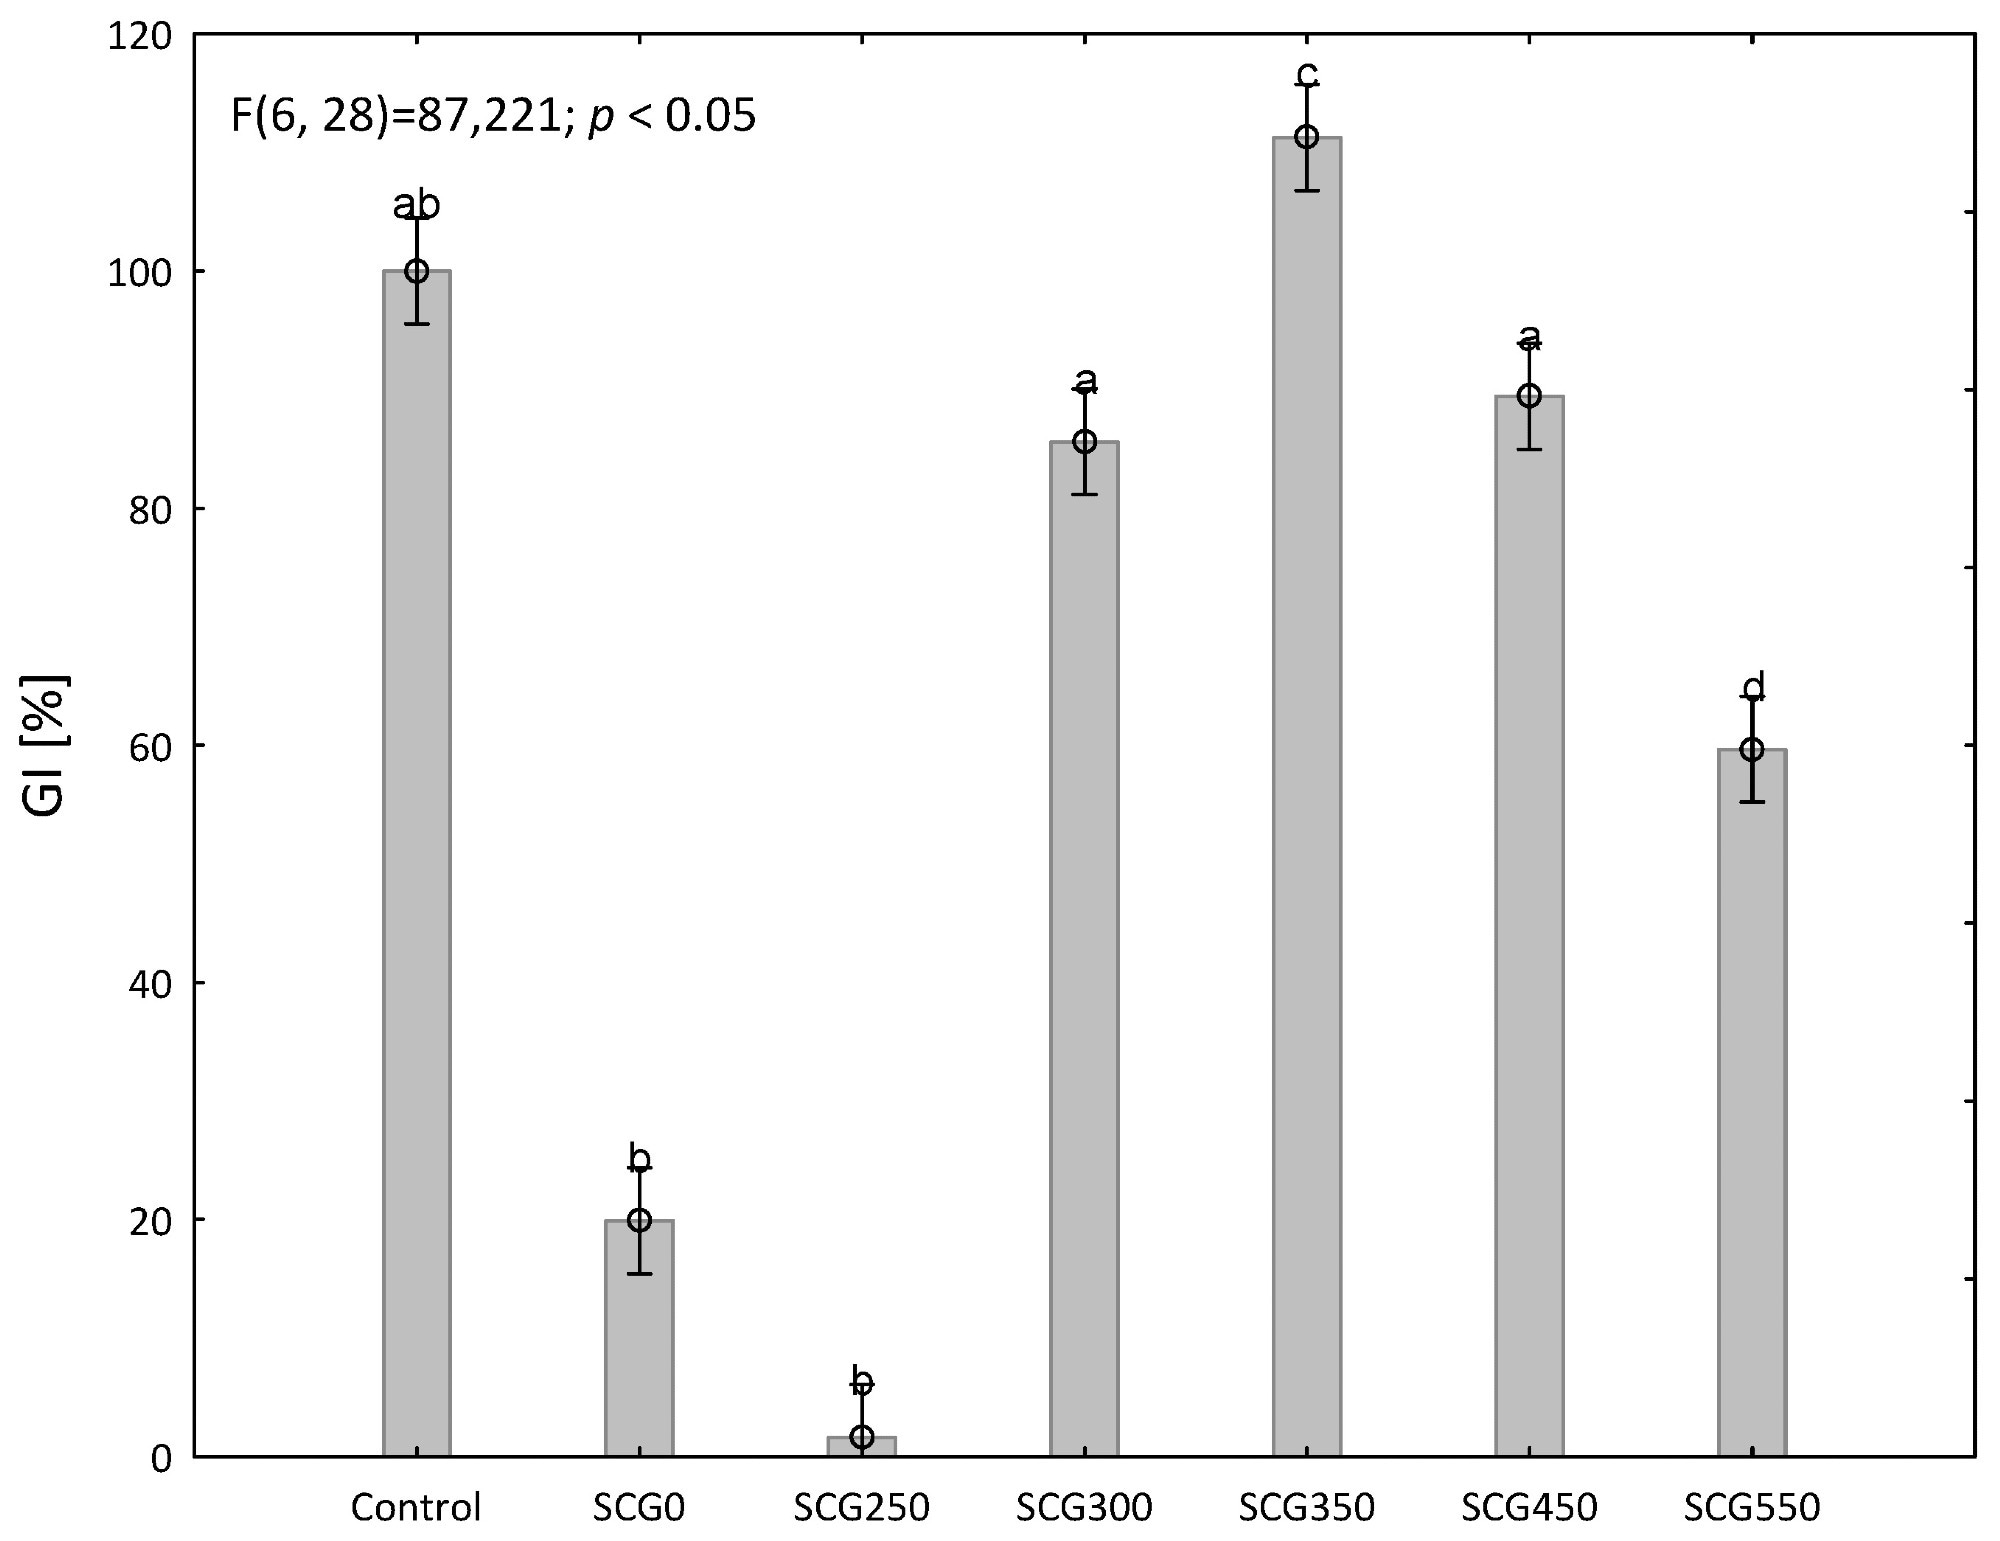 Phytotoxicity effect of SCG aqueous extracts on the germination of Lepidium sativum L. seeds after 48 h. Data are expressed as means of five independent bioassays (five replicates for each concentration (aqueous extracts) per bioassay) ± SE. Different letters (a–d) indicate significant differences between treatment effects when compared to the control (ANOVA, Tukey test, p < 0.05).